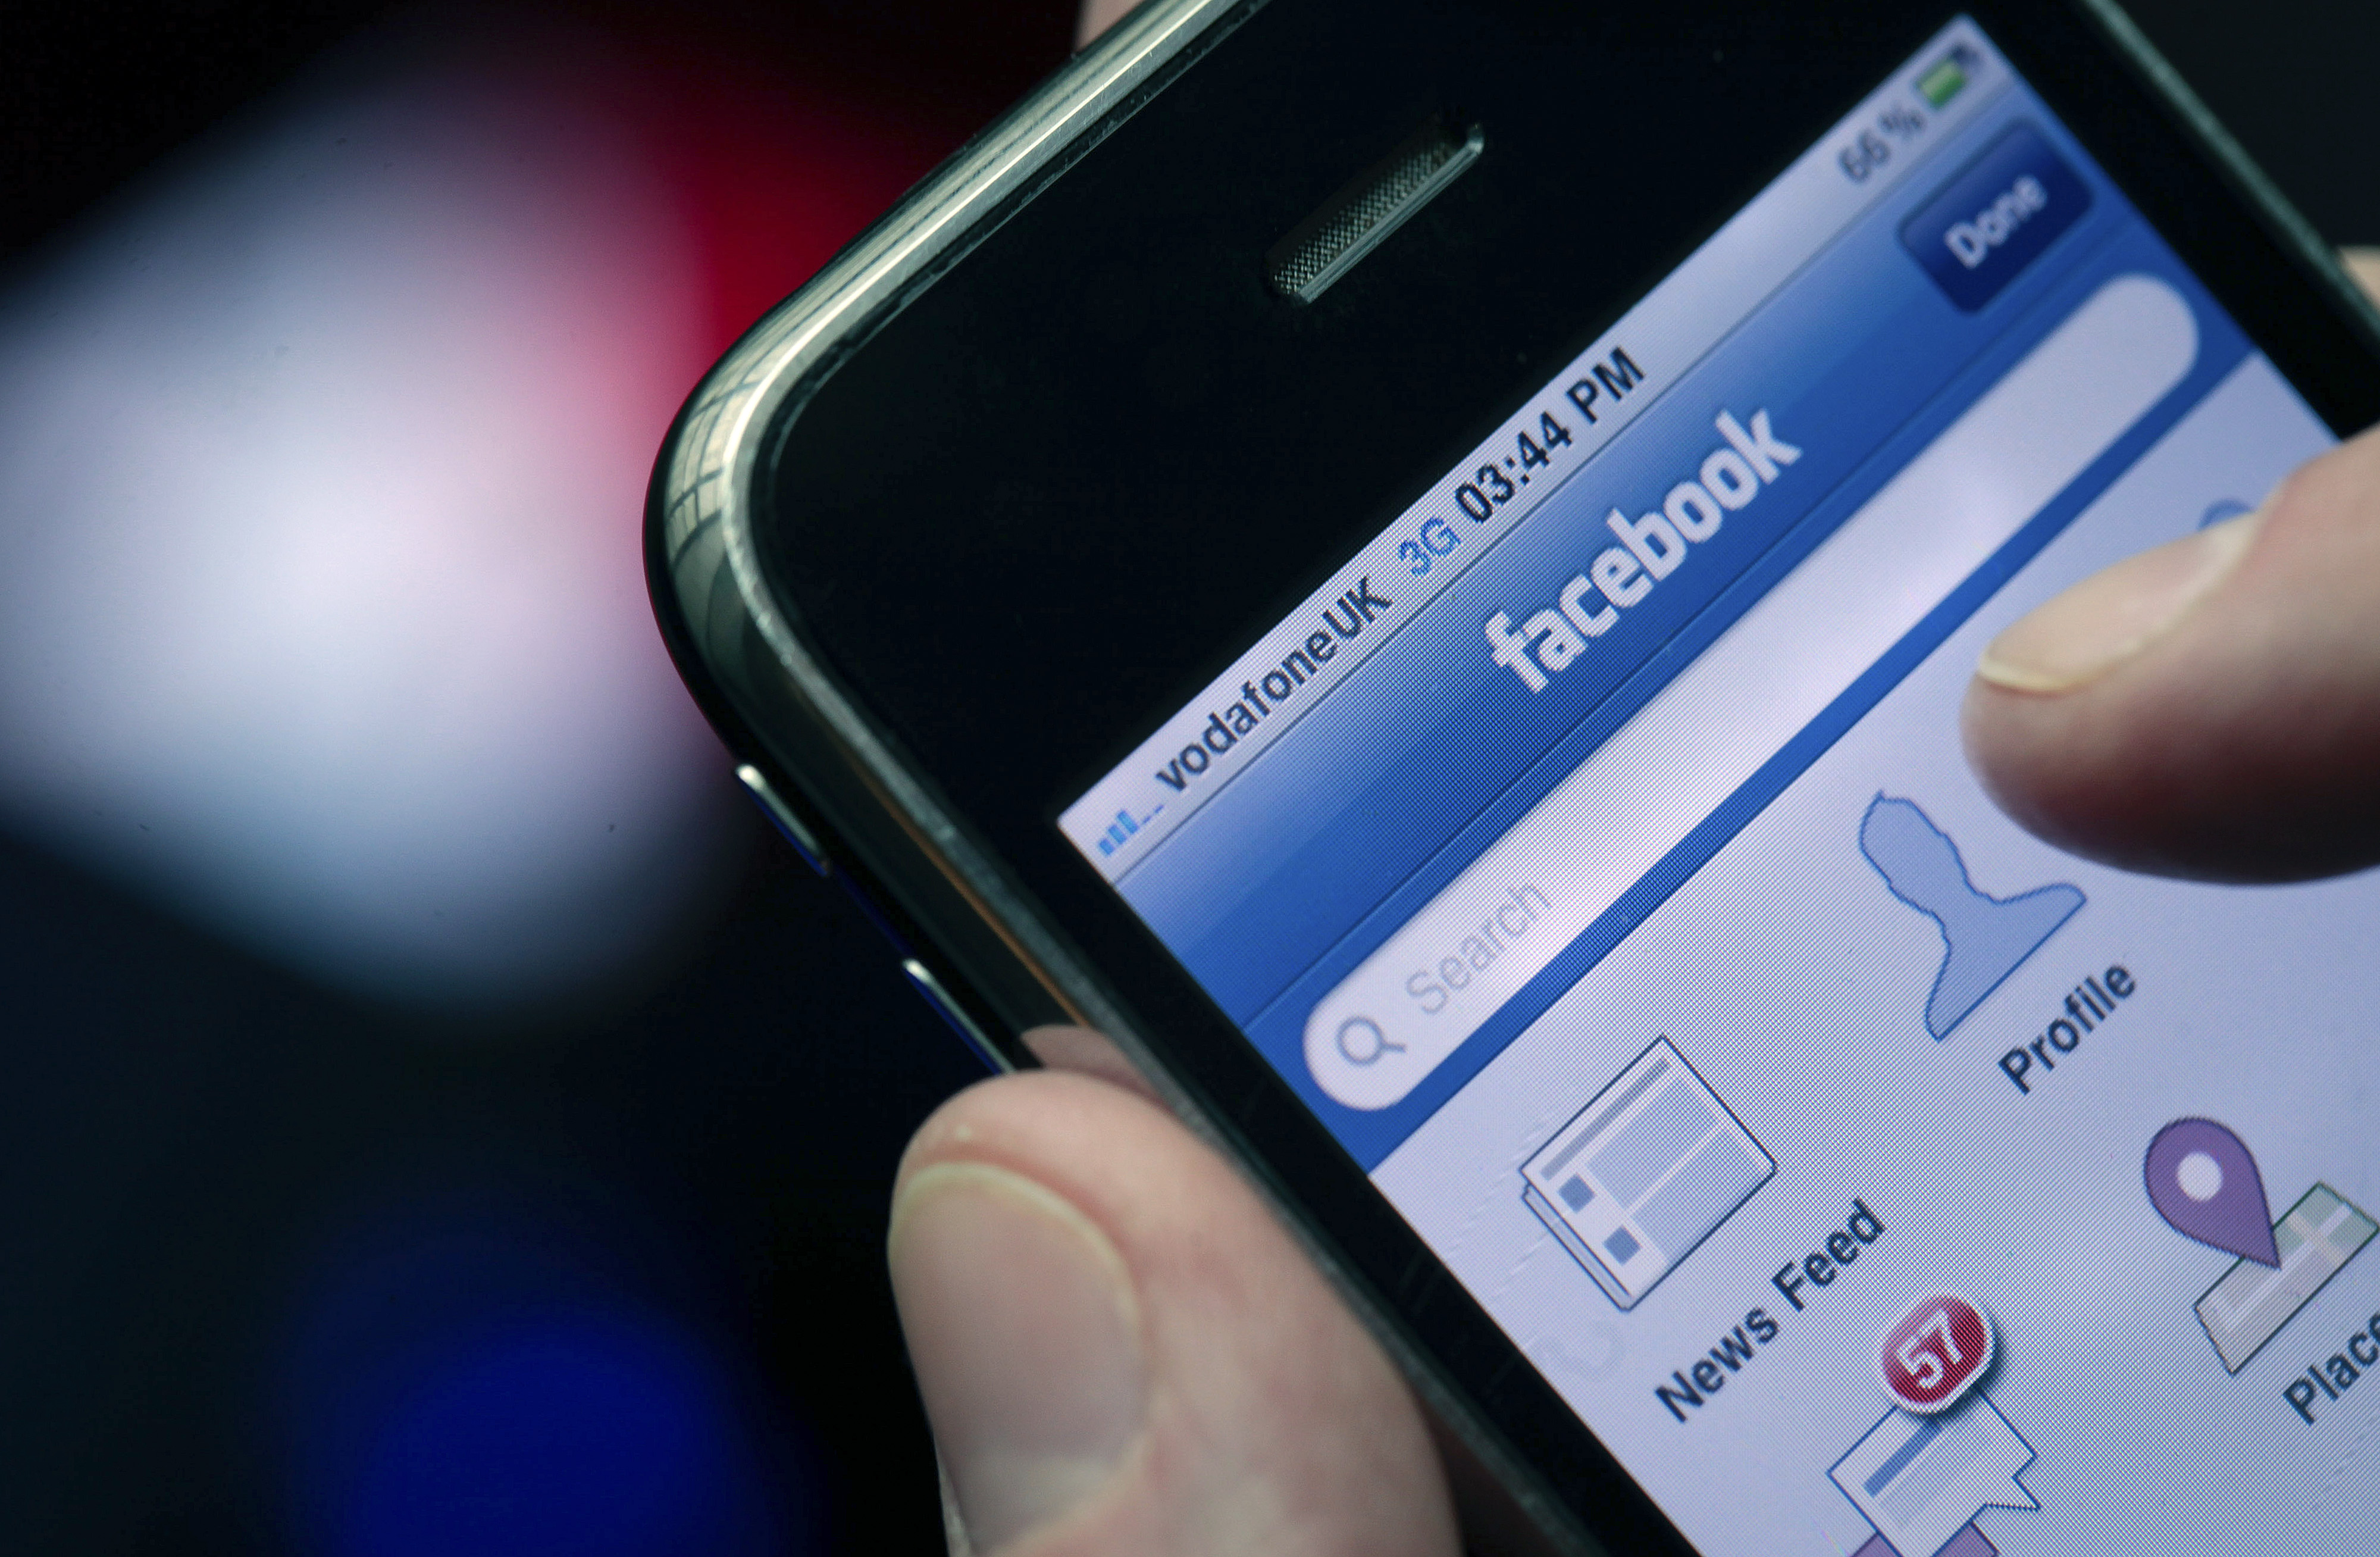 The Facebook Inc. logo is seen on an Apple Inc. iPhone in London, U.K., on May 14, 2012. (Bloomberg via Getty Images)